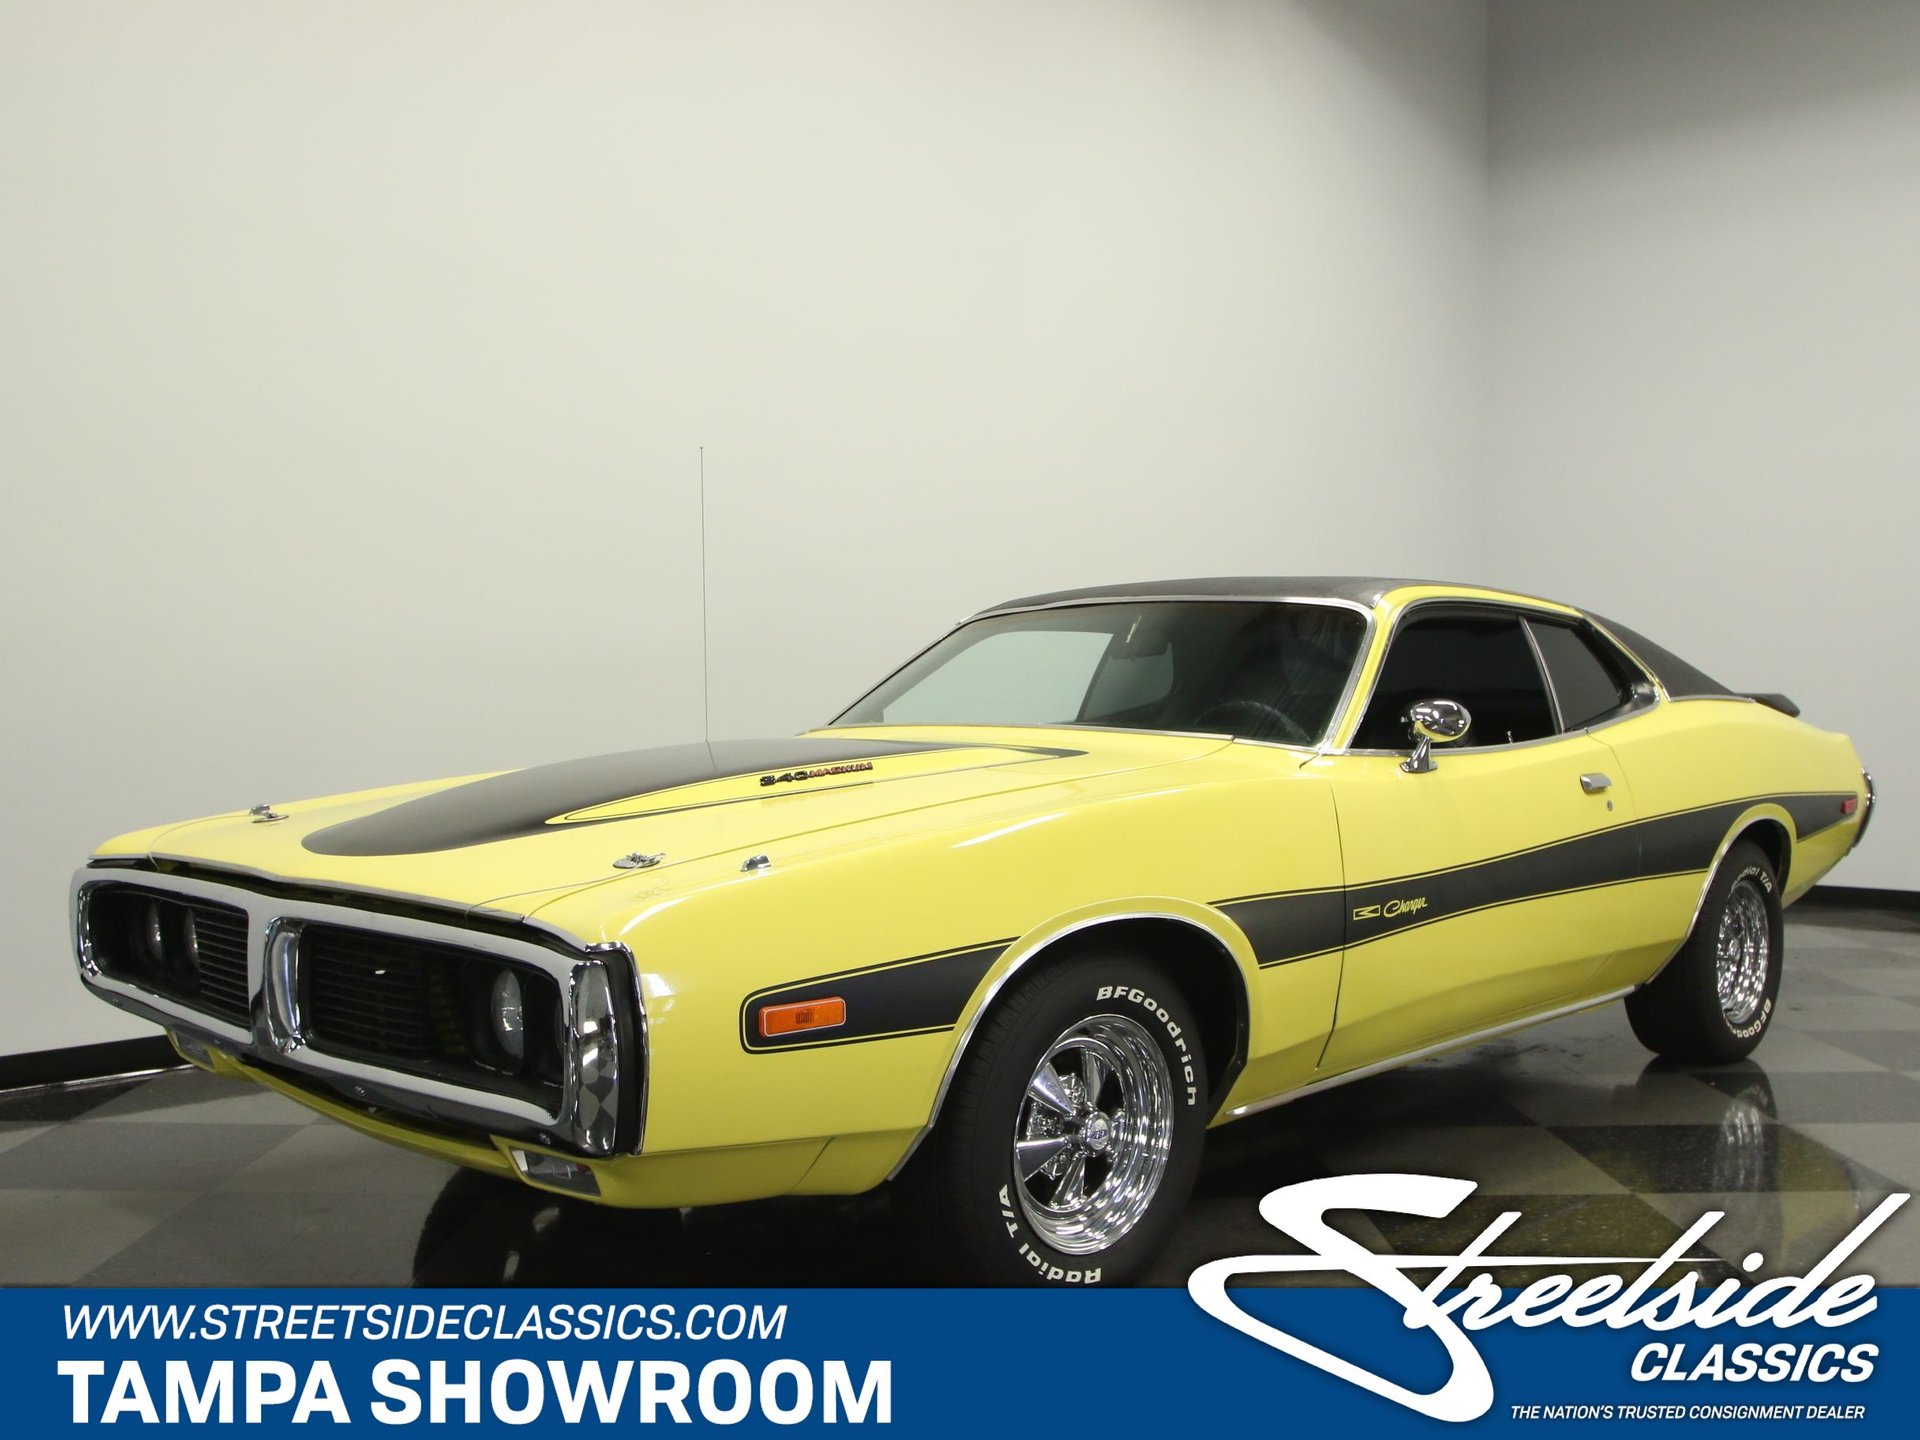 1973 Dodge Charger | Classic Cars for Sale - Streetside Classics